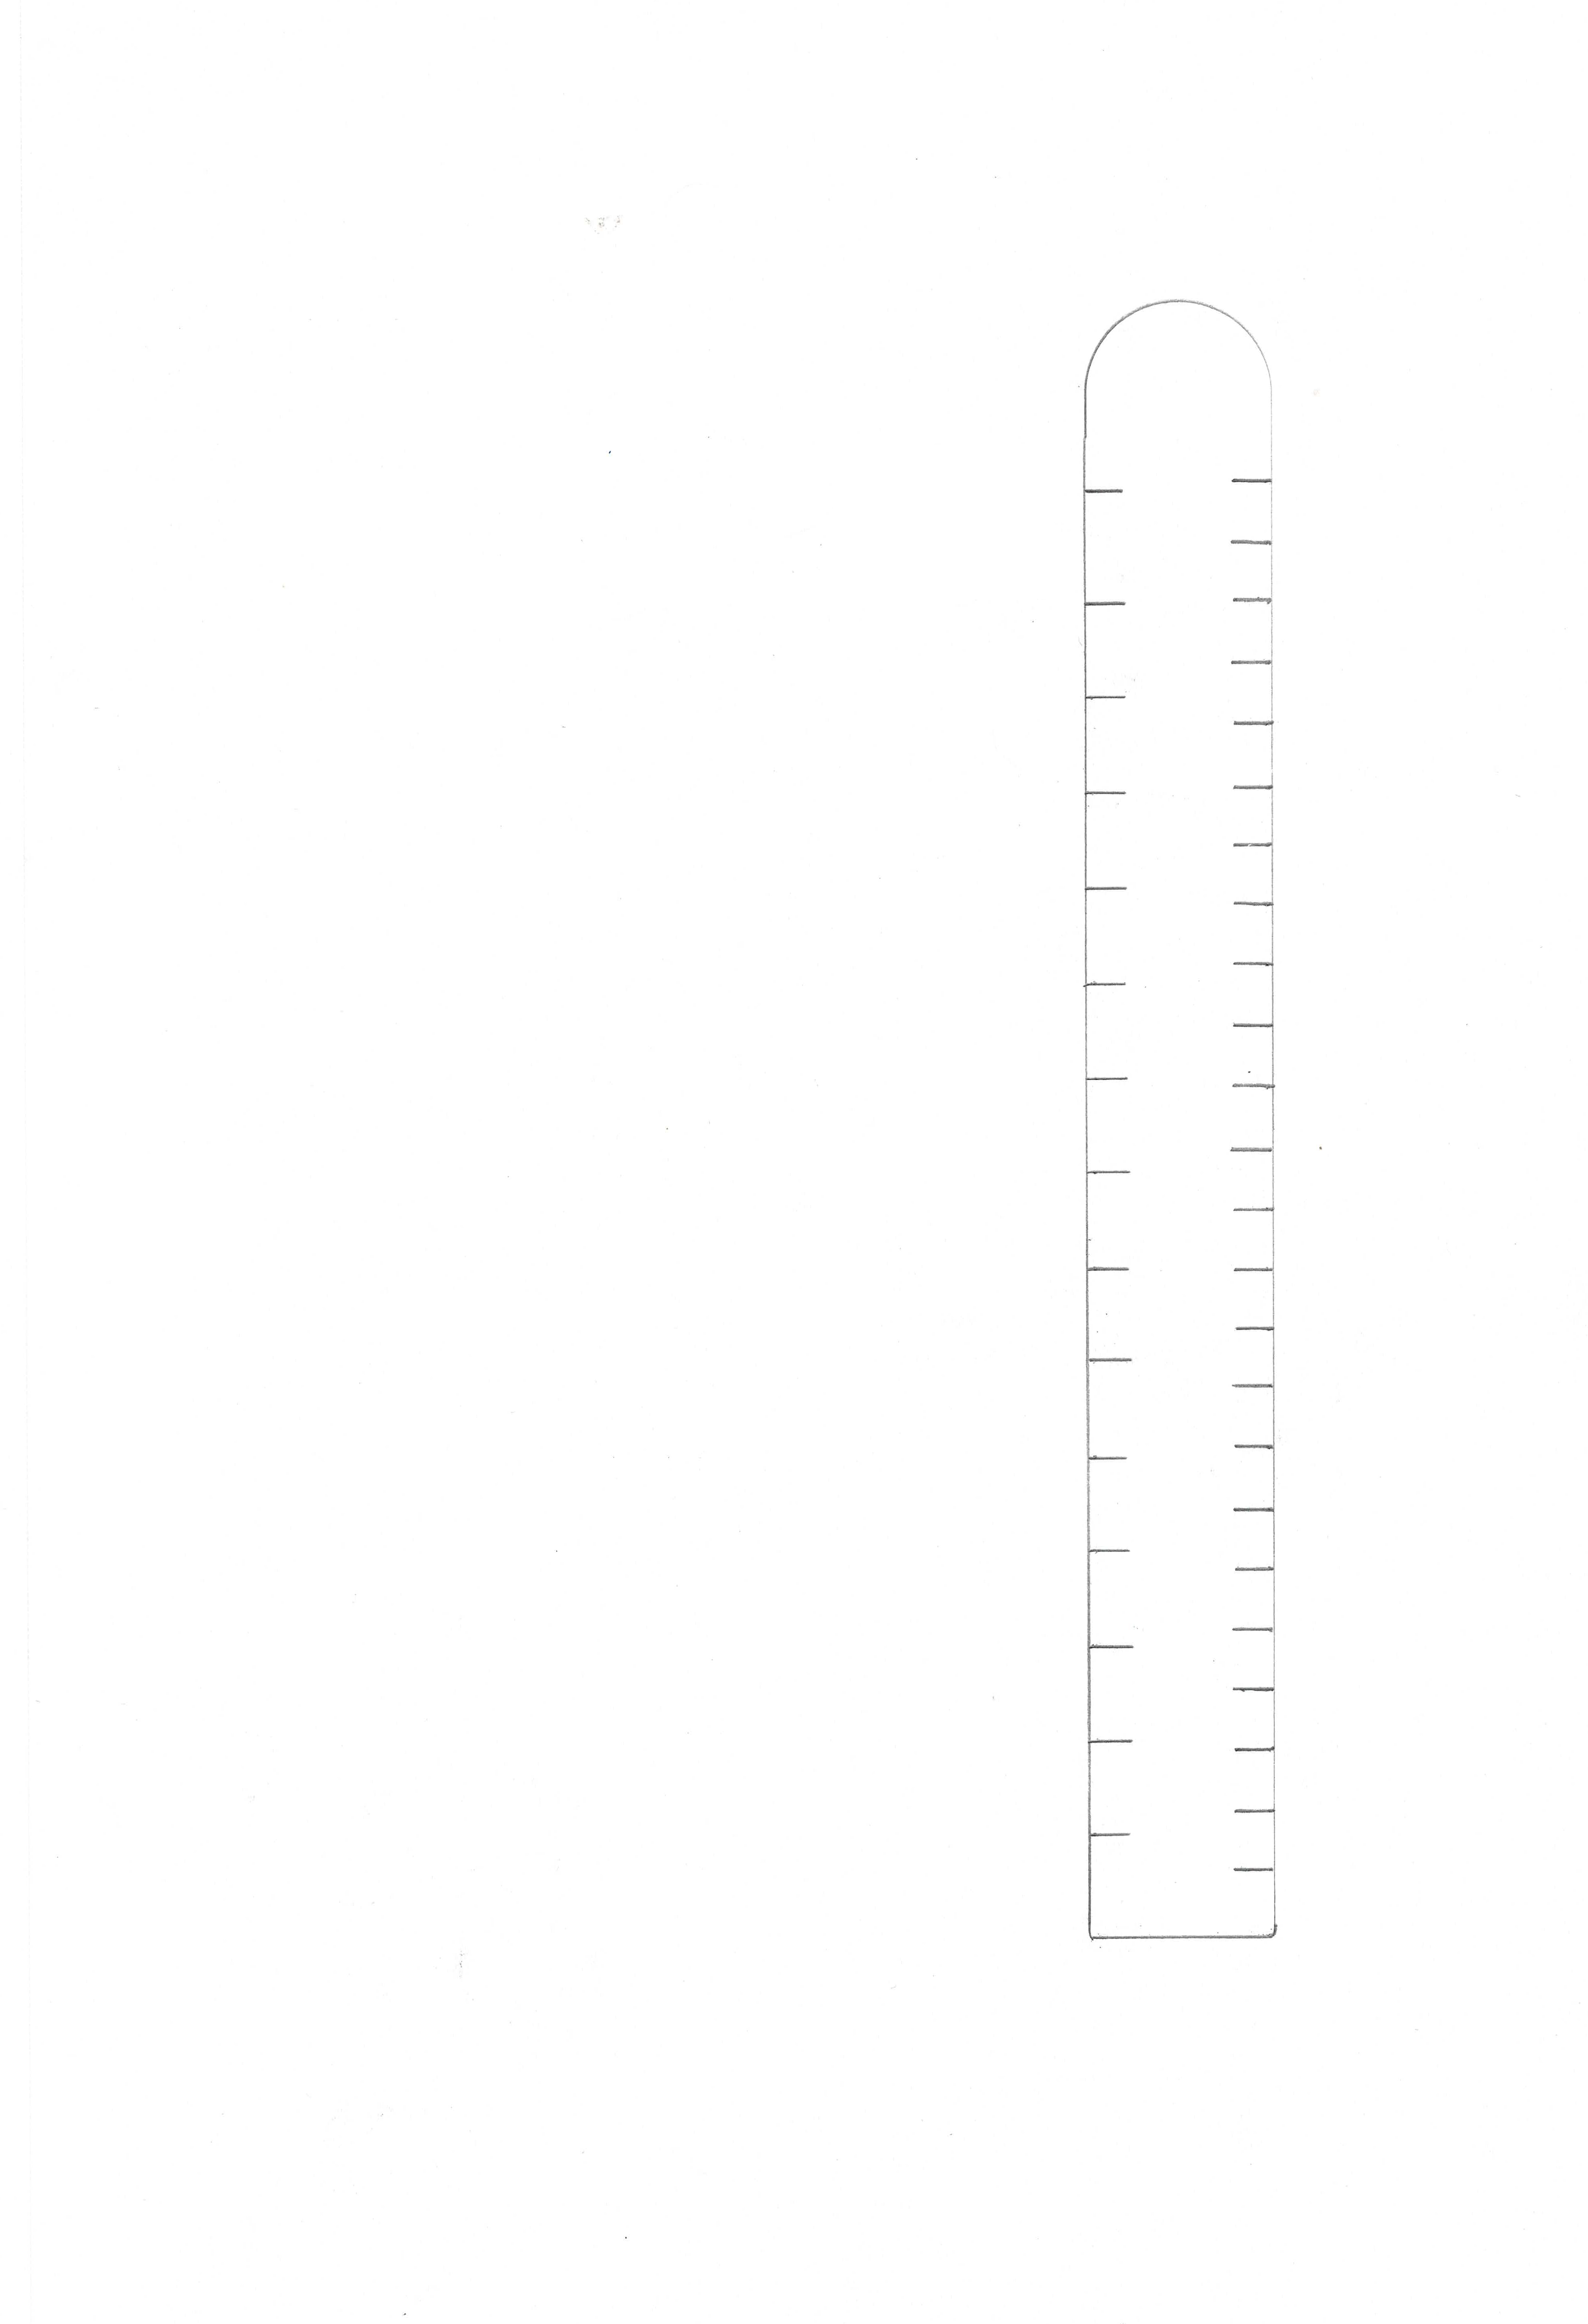 pencil drawing of a ruler with accurate tick marks